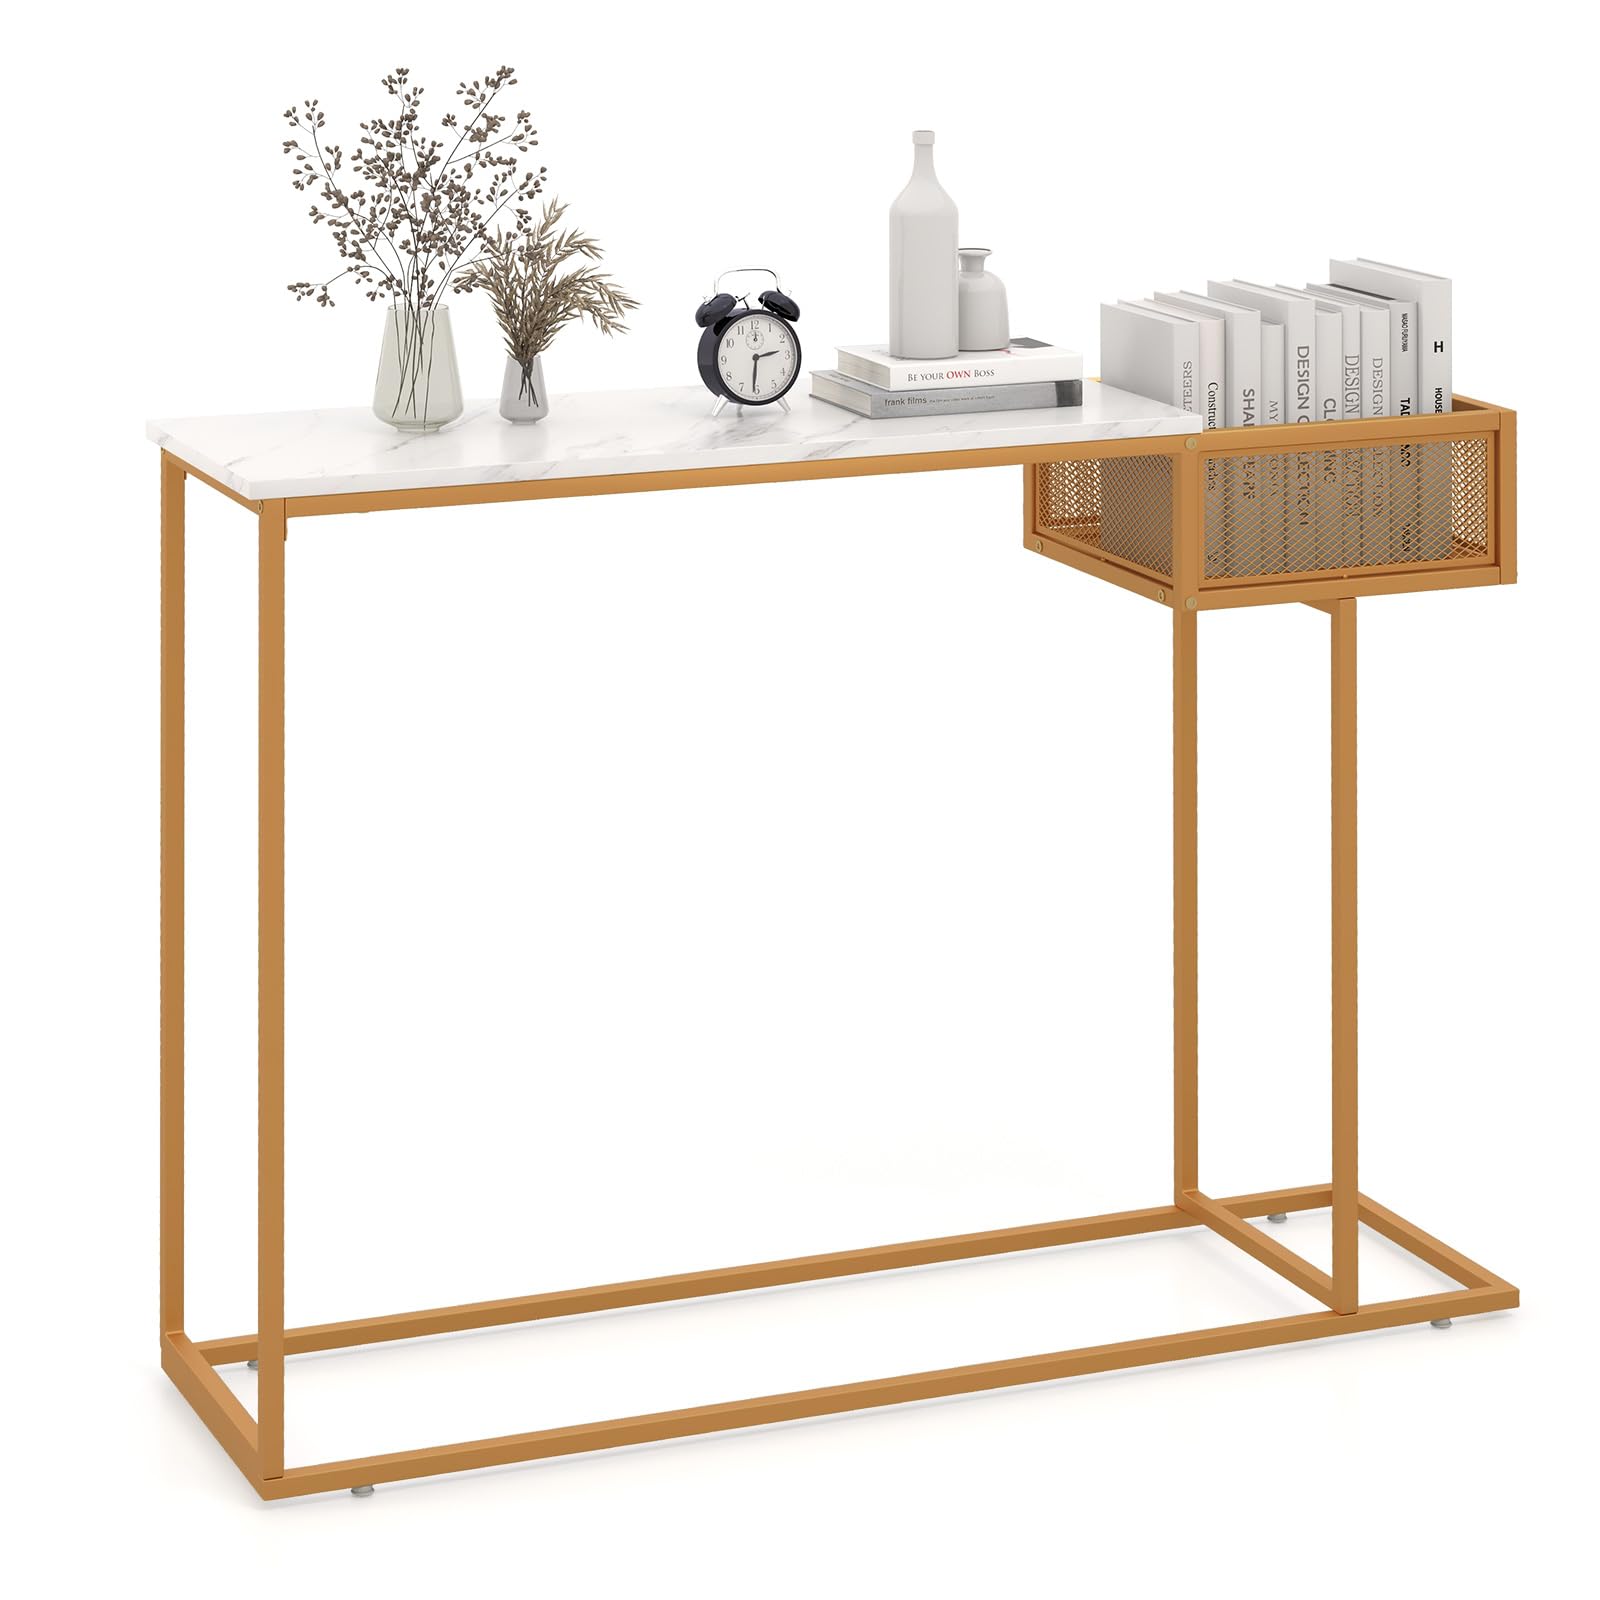 Giantex Narrow Console Table with Storage - Gold Sofa Table with Storage Basket